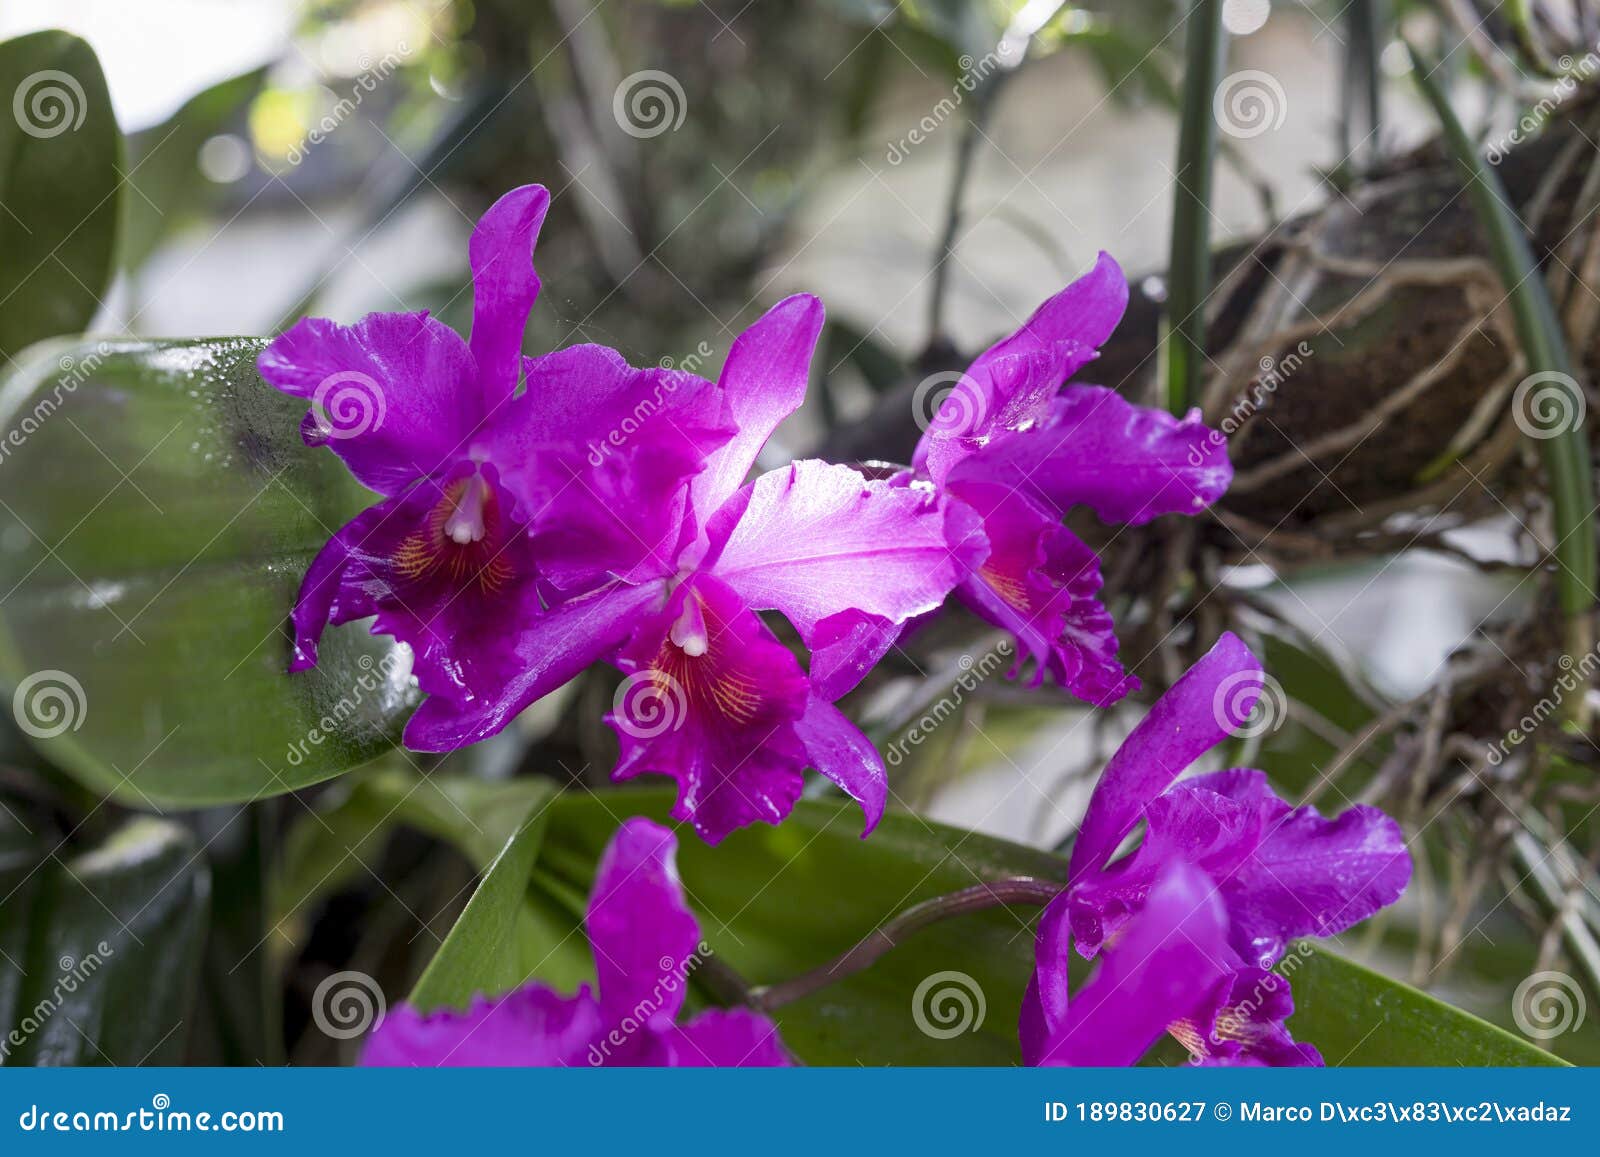 guarianthe skinneri is the national flower of costa rica, where it is known as guaria morada